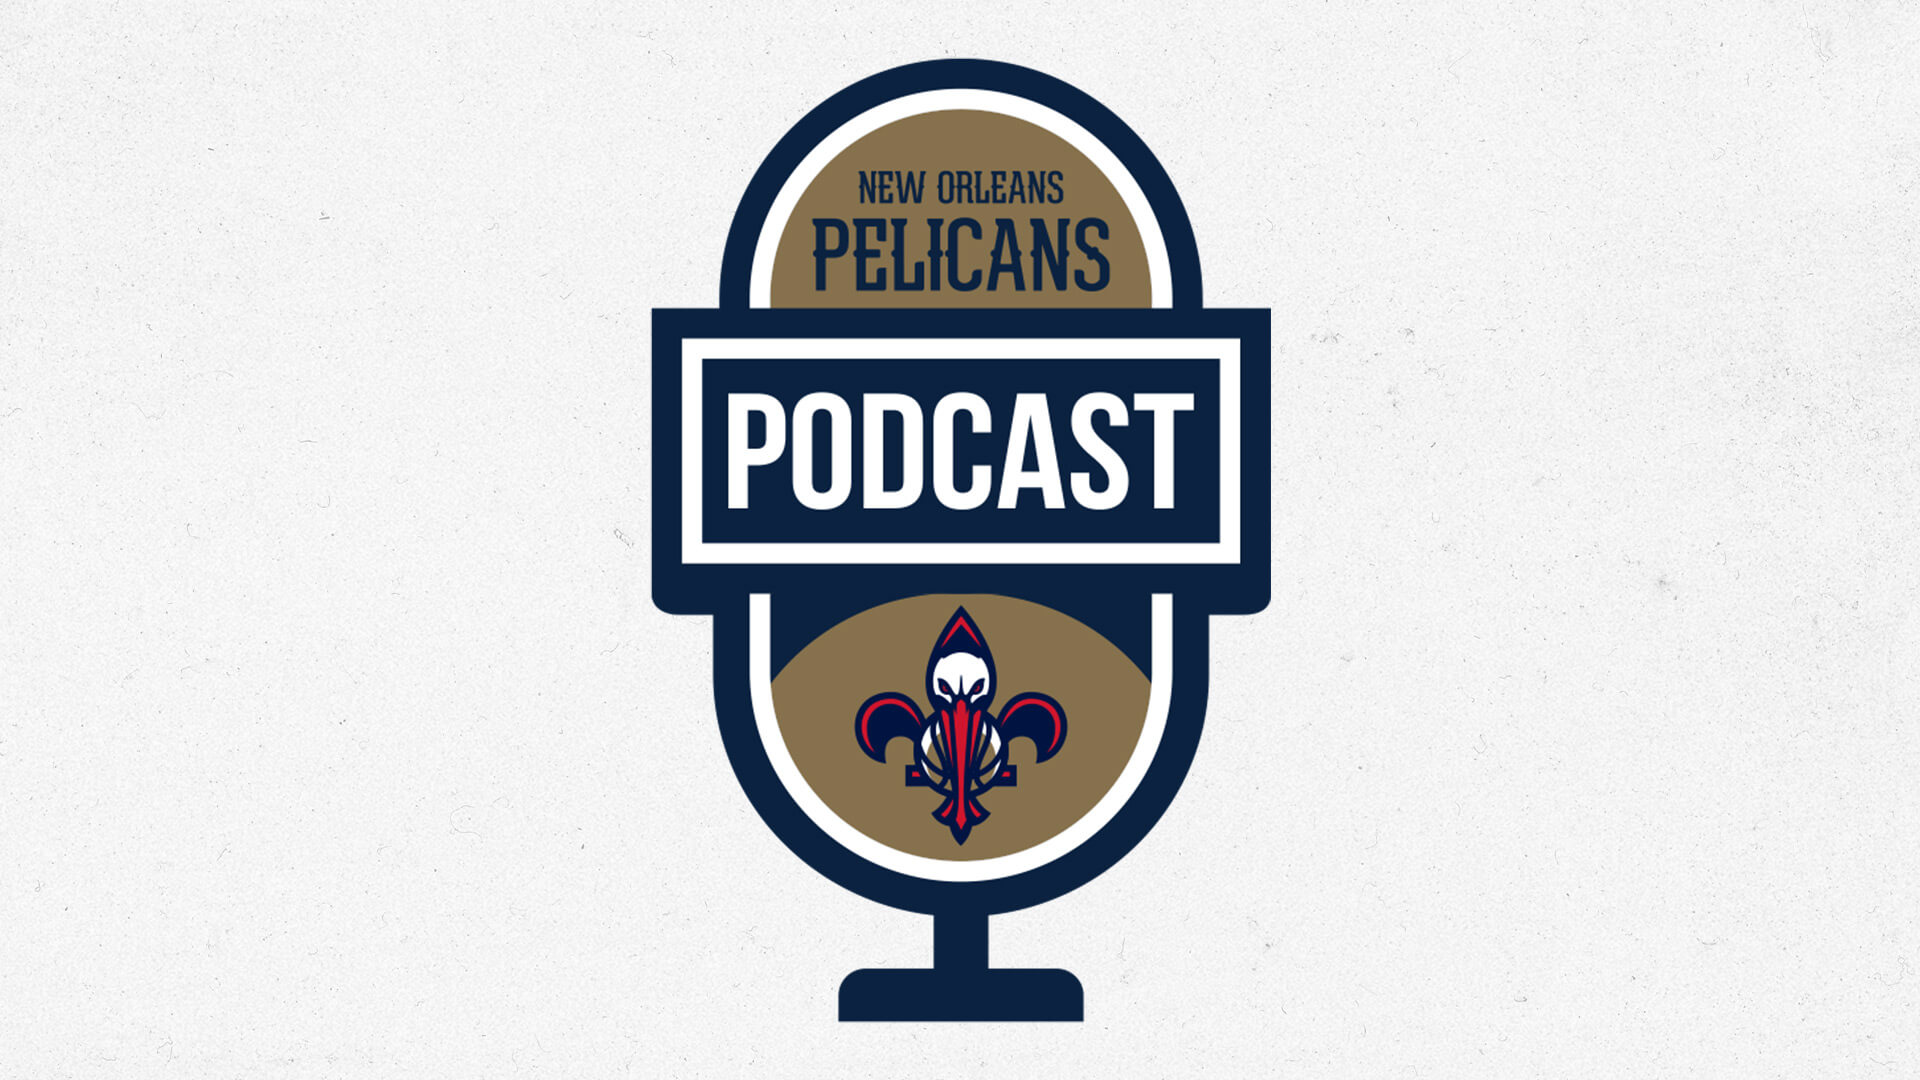 Will Guillory talks Zion Williamson's emergence, Pelicans fanbase | Pelicans Podcast